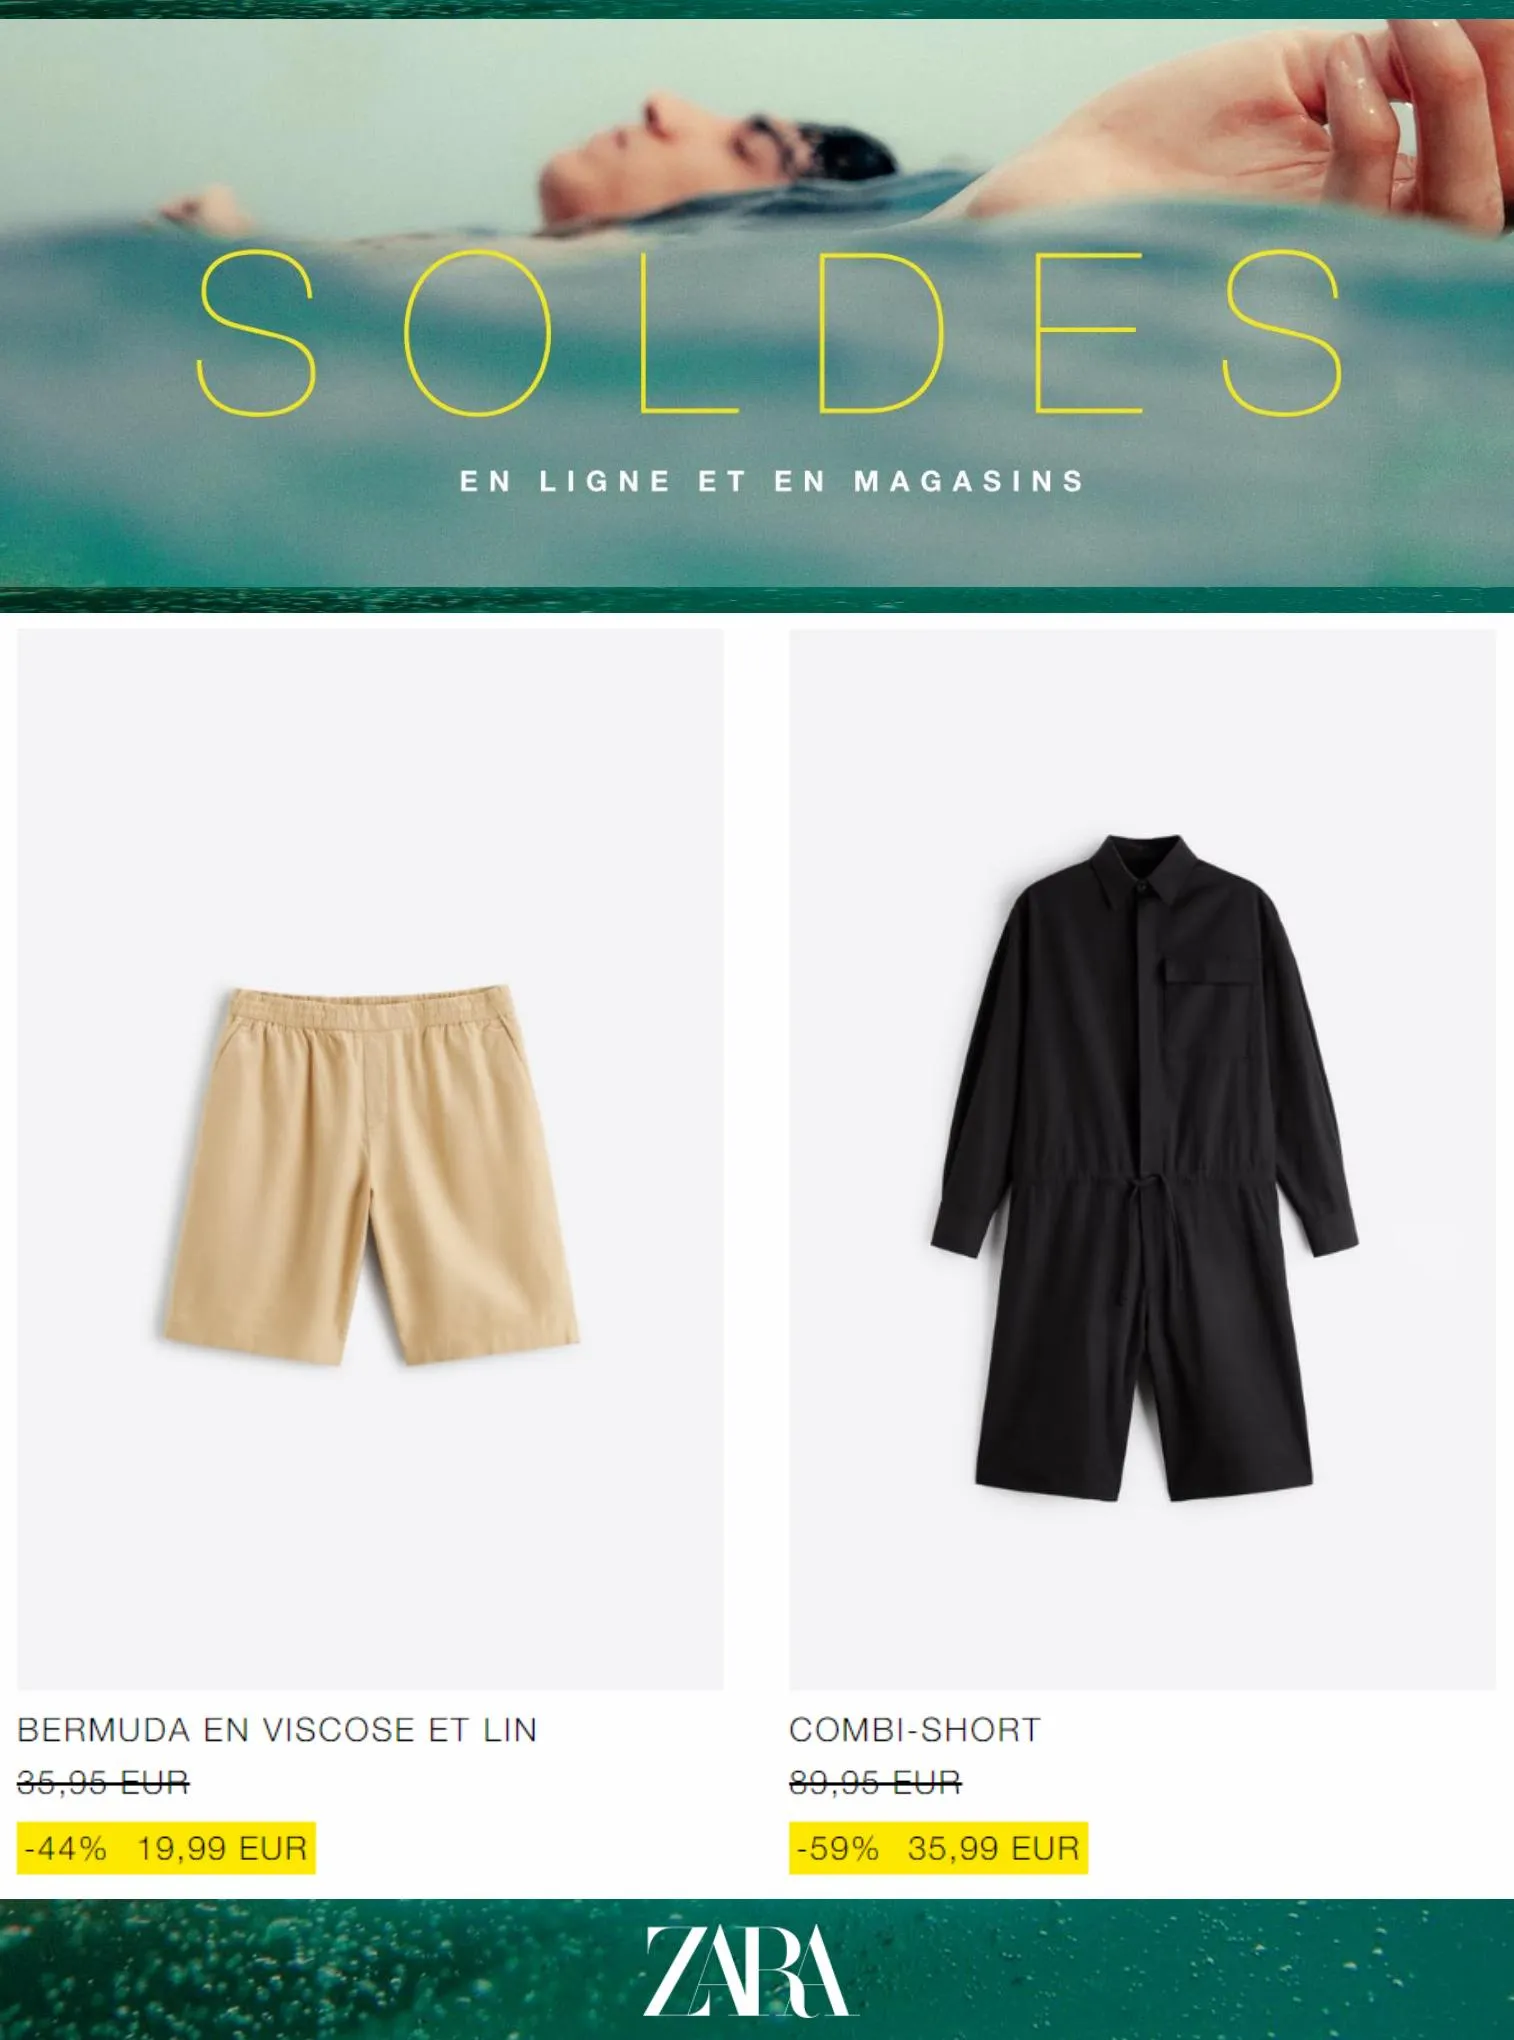 Catalogue Soldes | Homme, page 00006